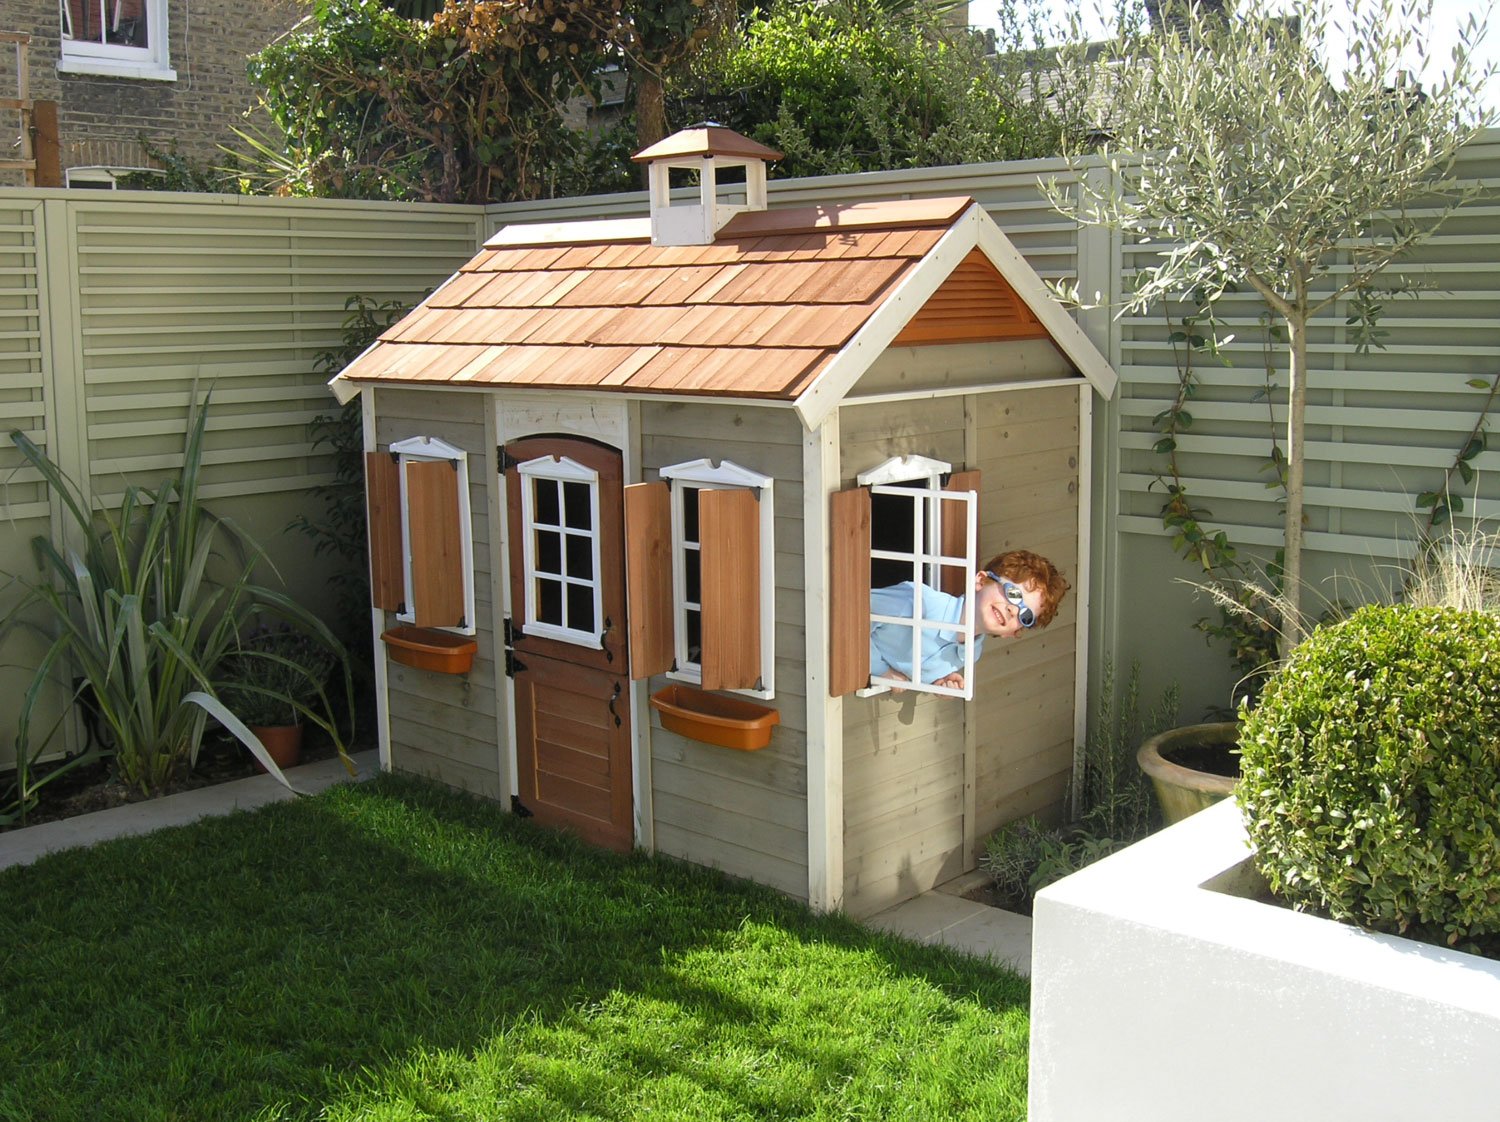  Child having fun in play house in a newly landscaped garden in London. 